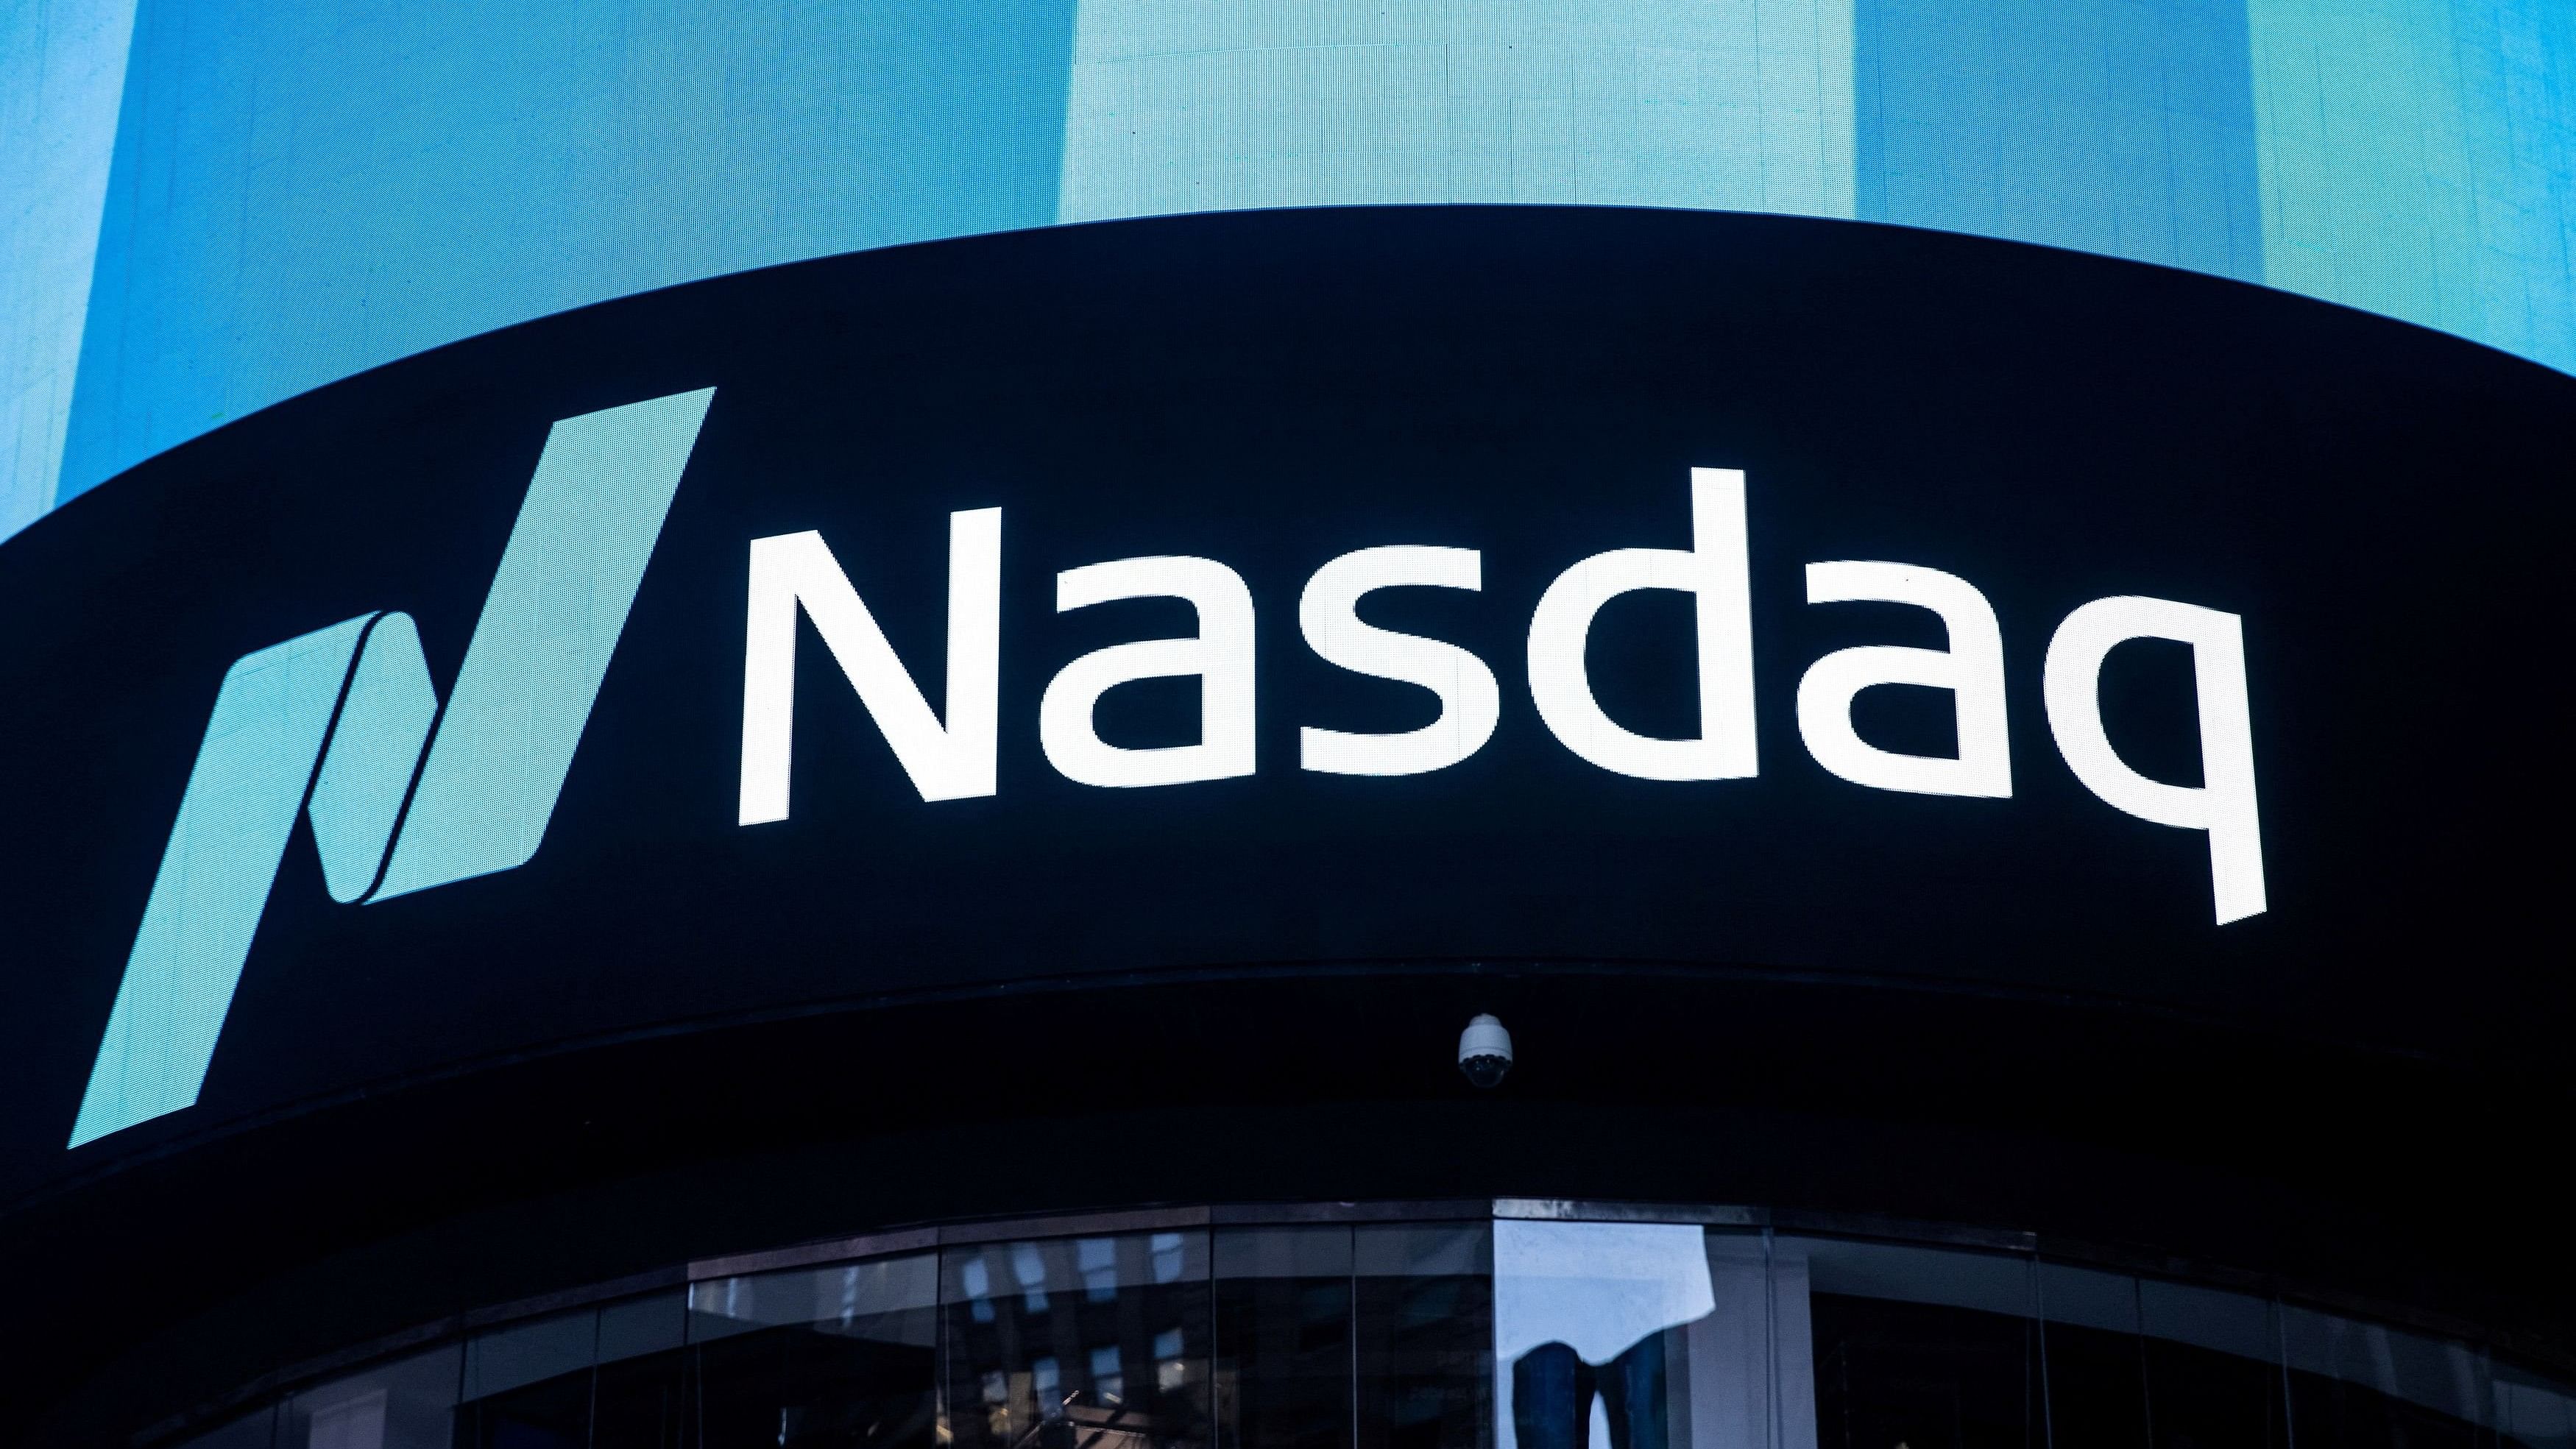 <div class="paragraphs"><p>The Nasdaq logo is displayed at the Nasdaq Market site in Times Square in New York City</p></div>